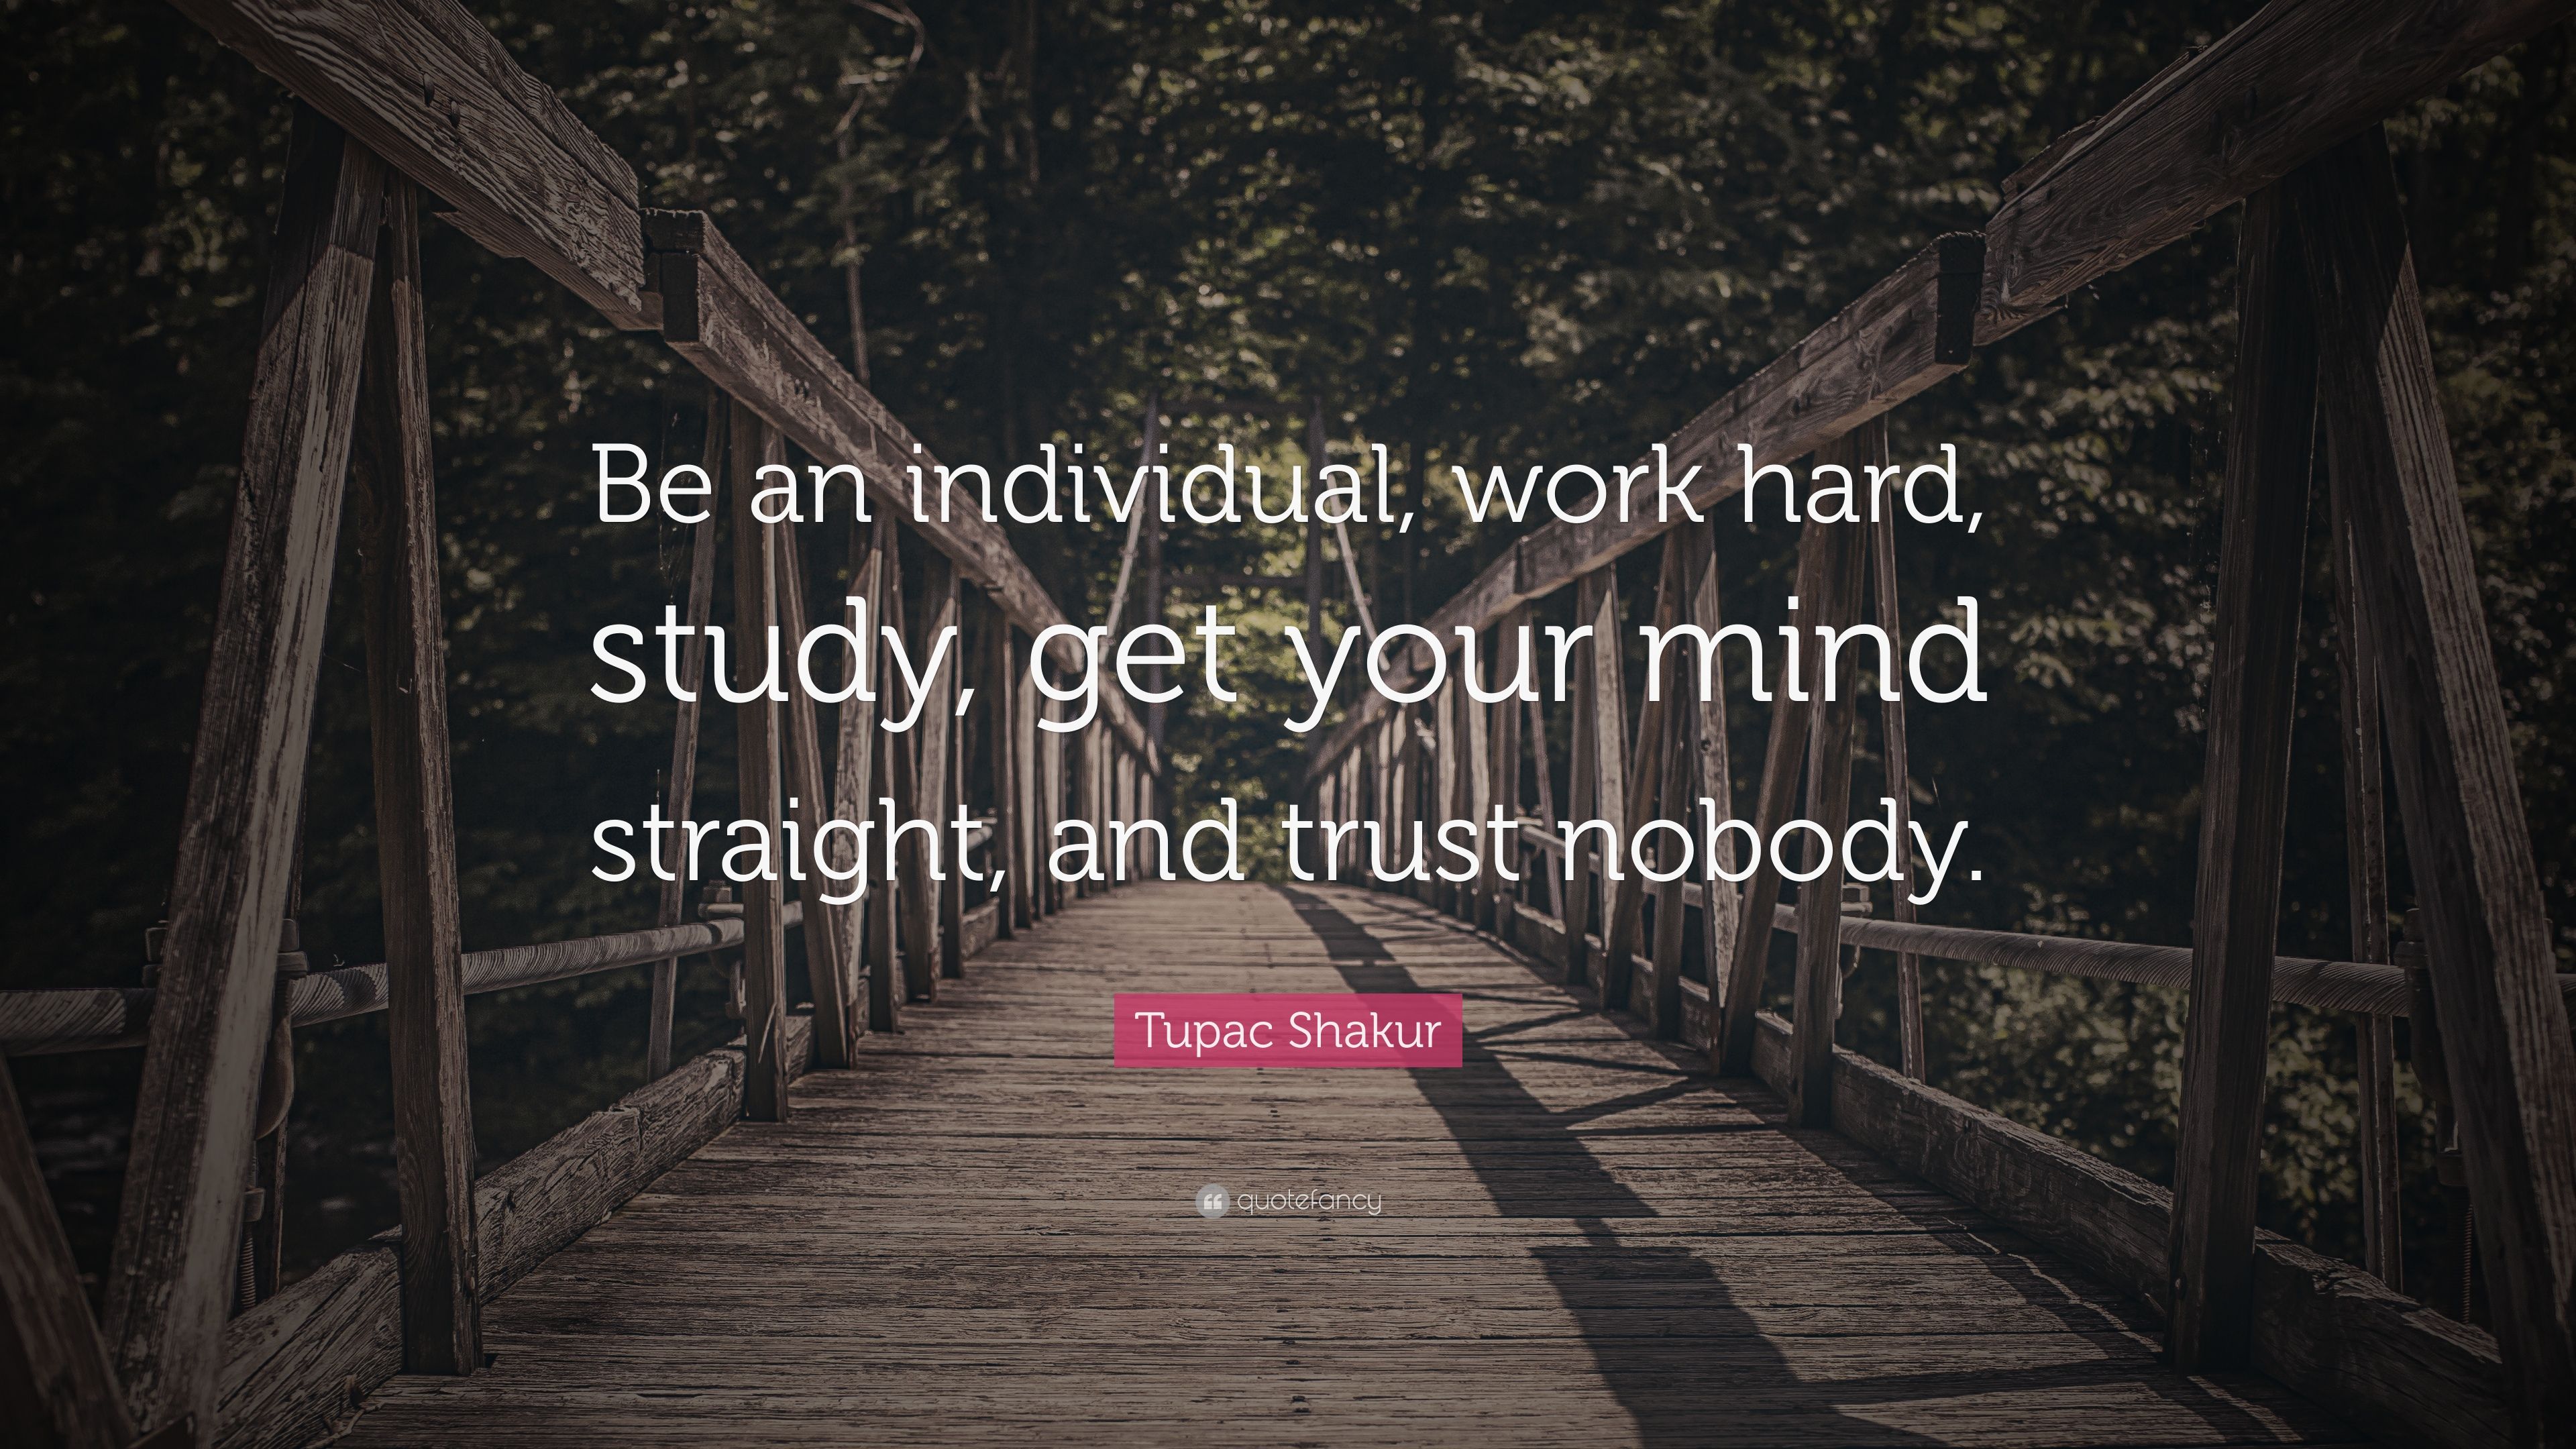 Tupac Shakur Quote: “Be an individual, work hard, study, get your